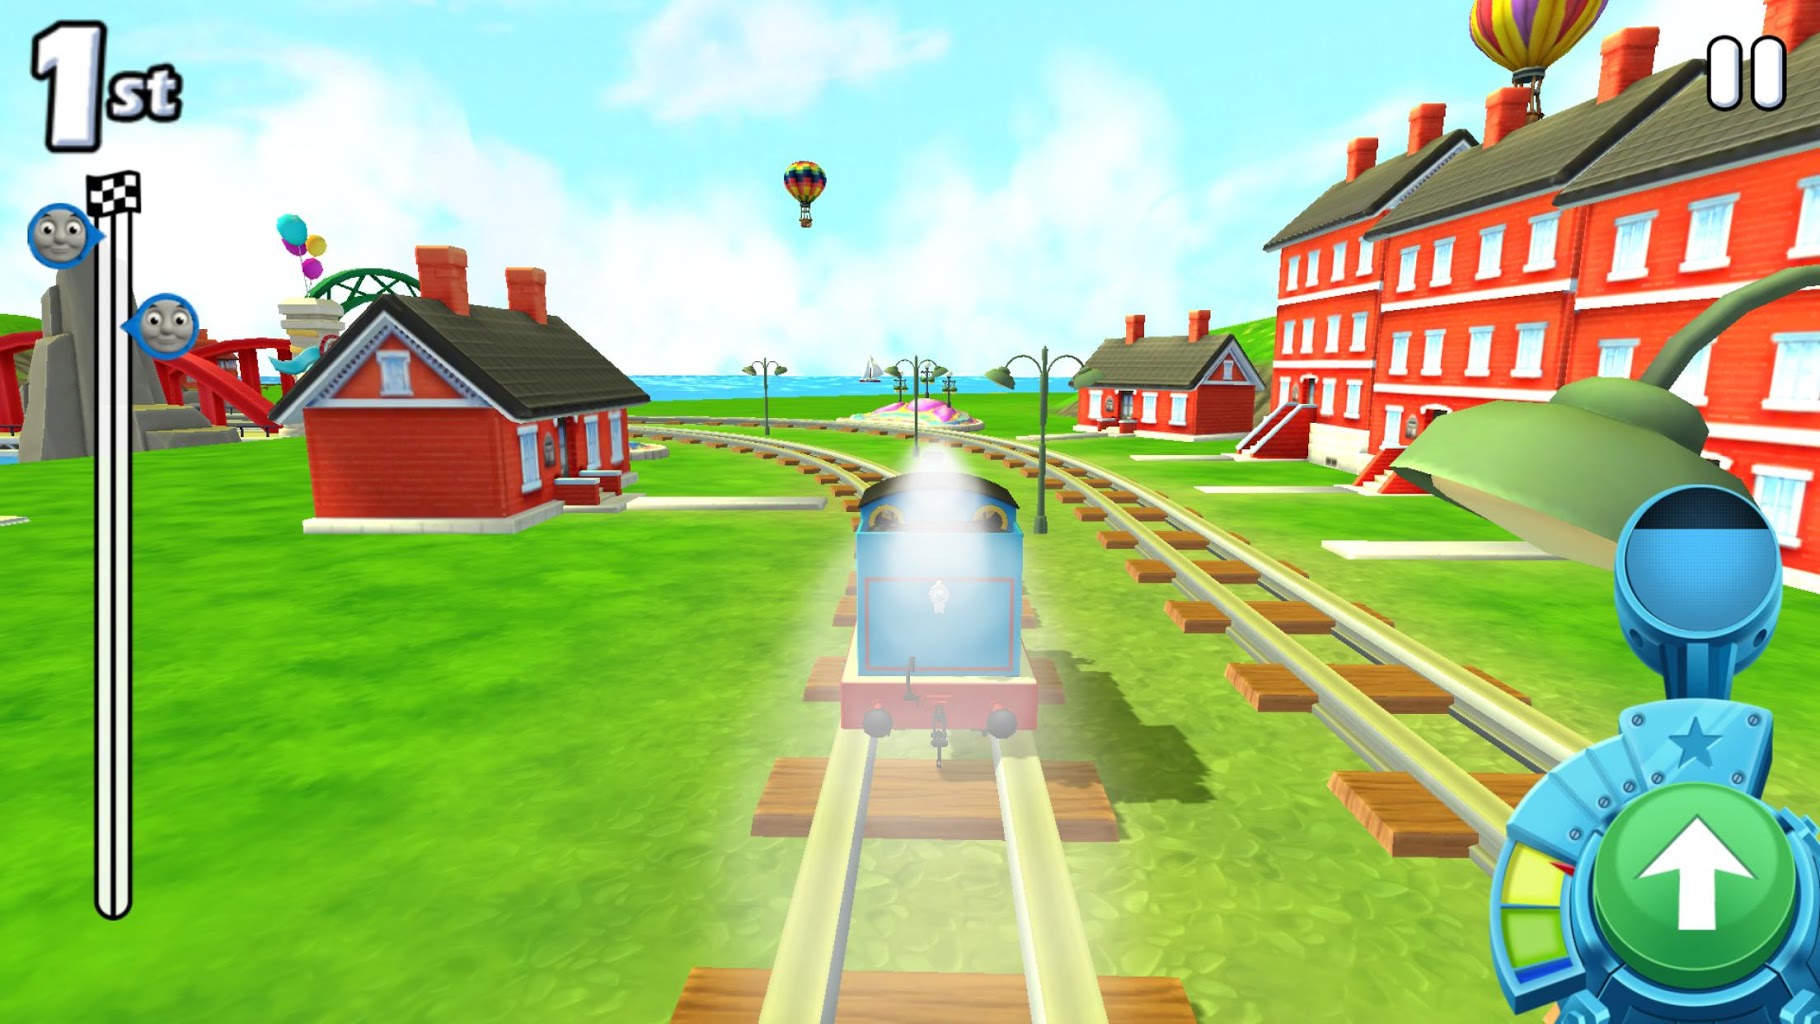 Download Thomas & Friends: Go Go Thomas 2.3 APK (MOD Unlocked) for android